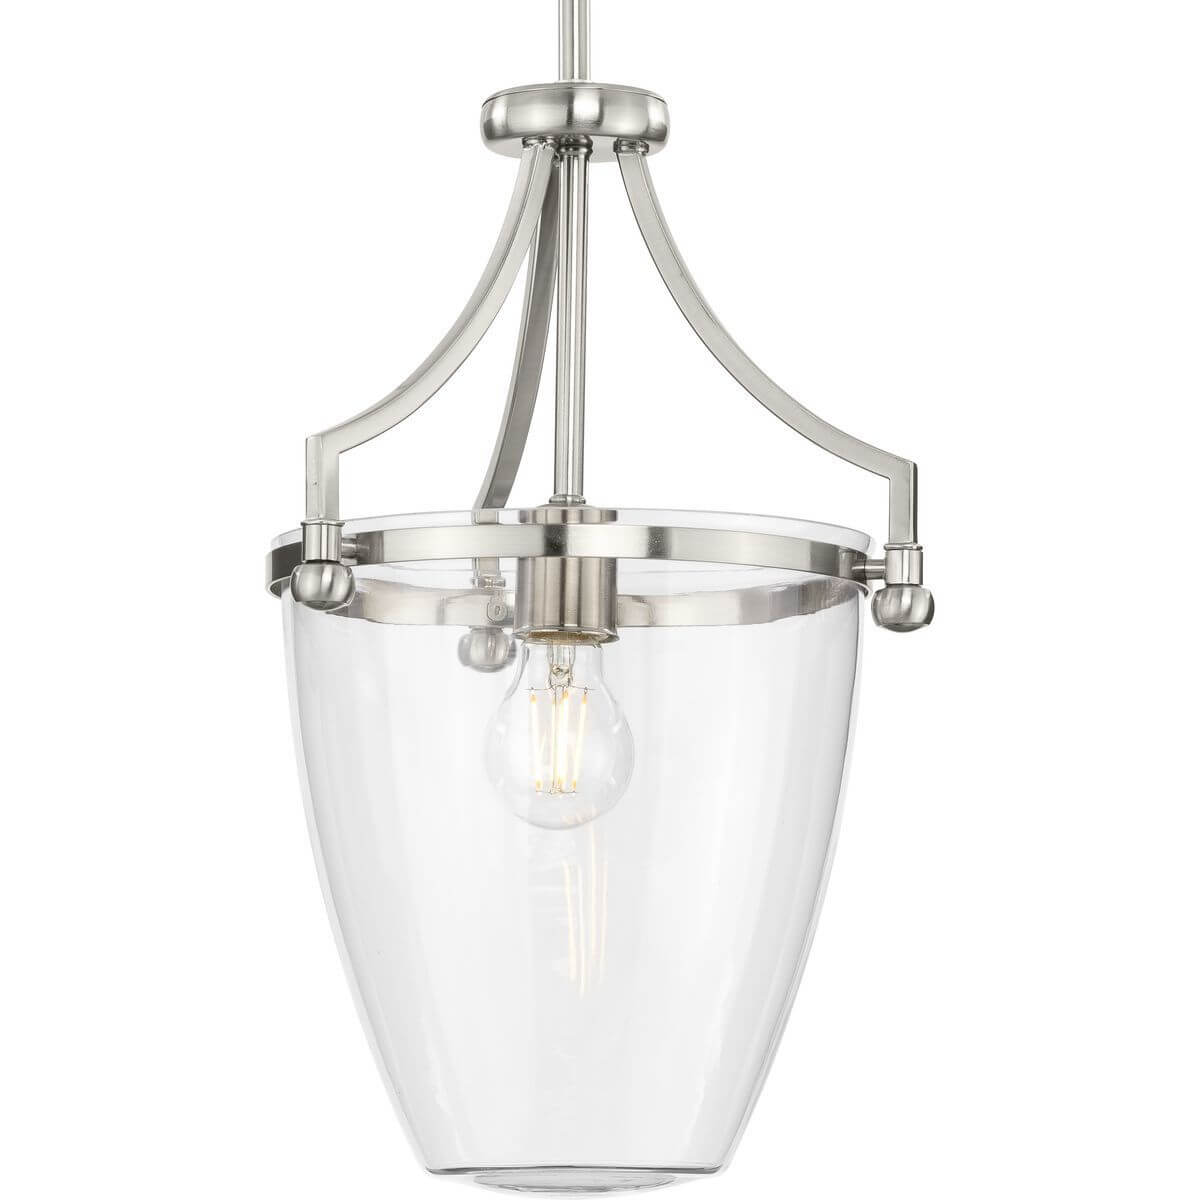 Progress Lighting Parkhurst 1 Light 12 inch Mini Pendant in Brushed Nickel with Clear Glass P500360-009